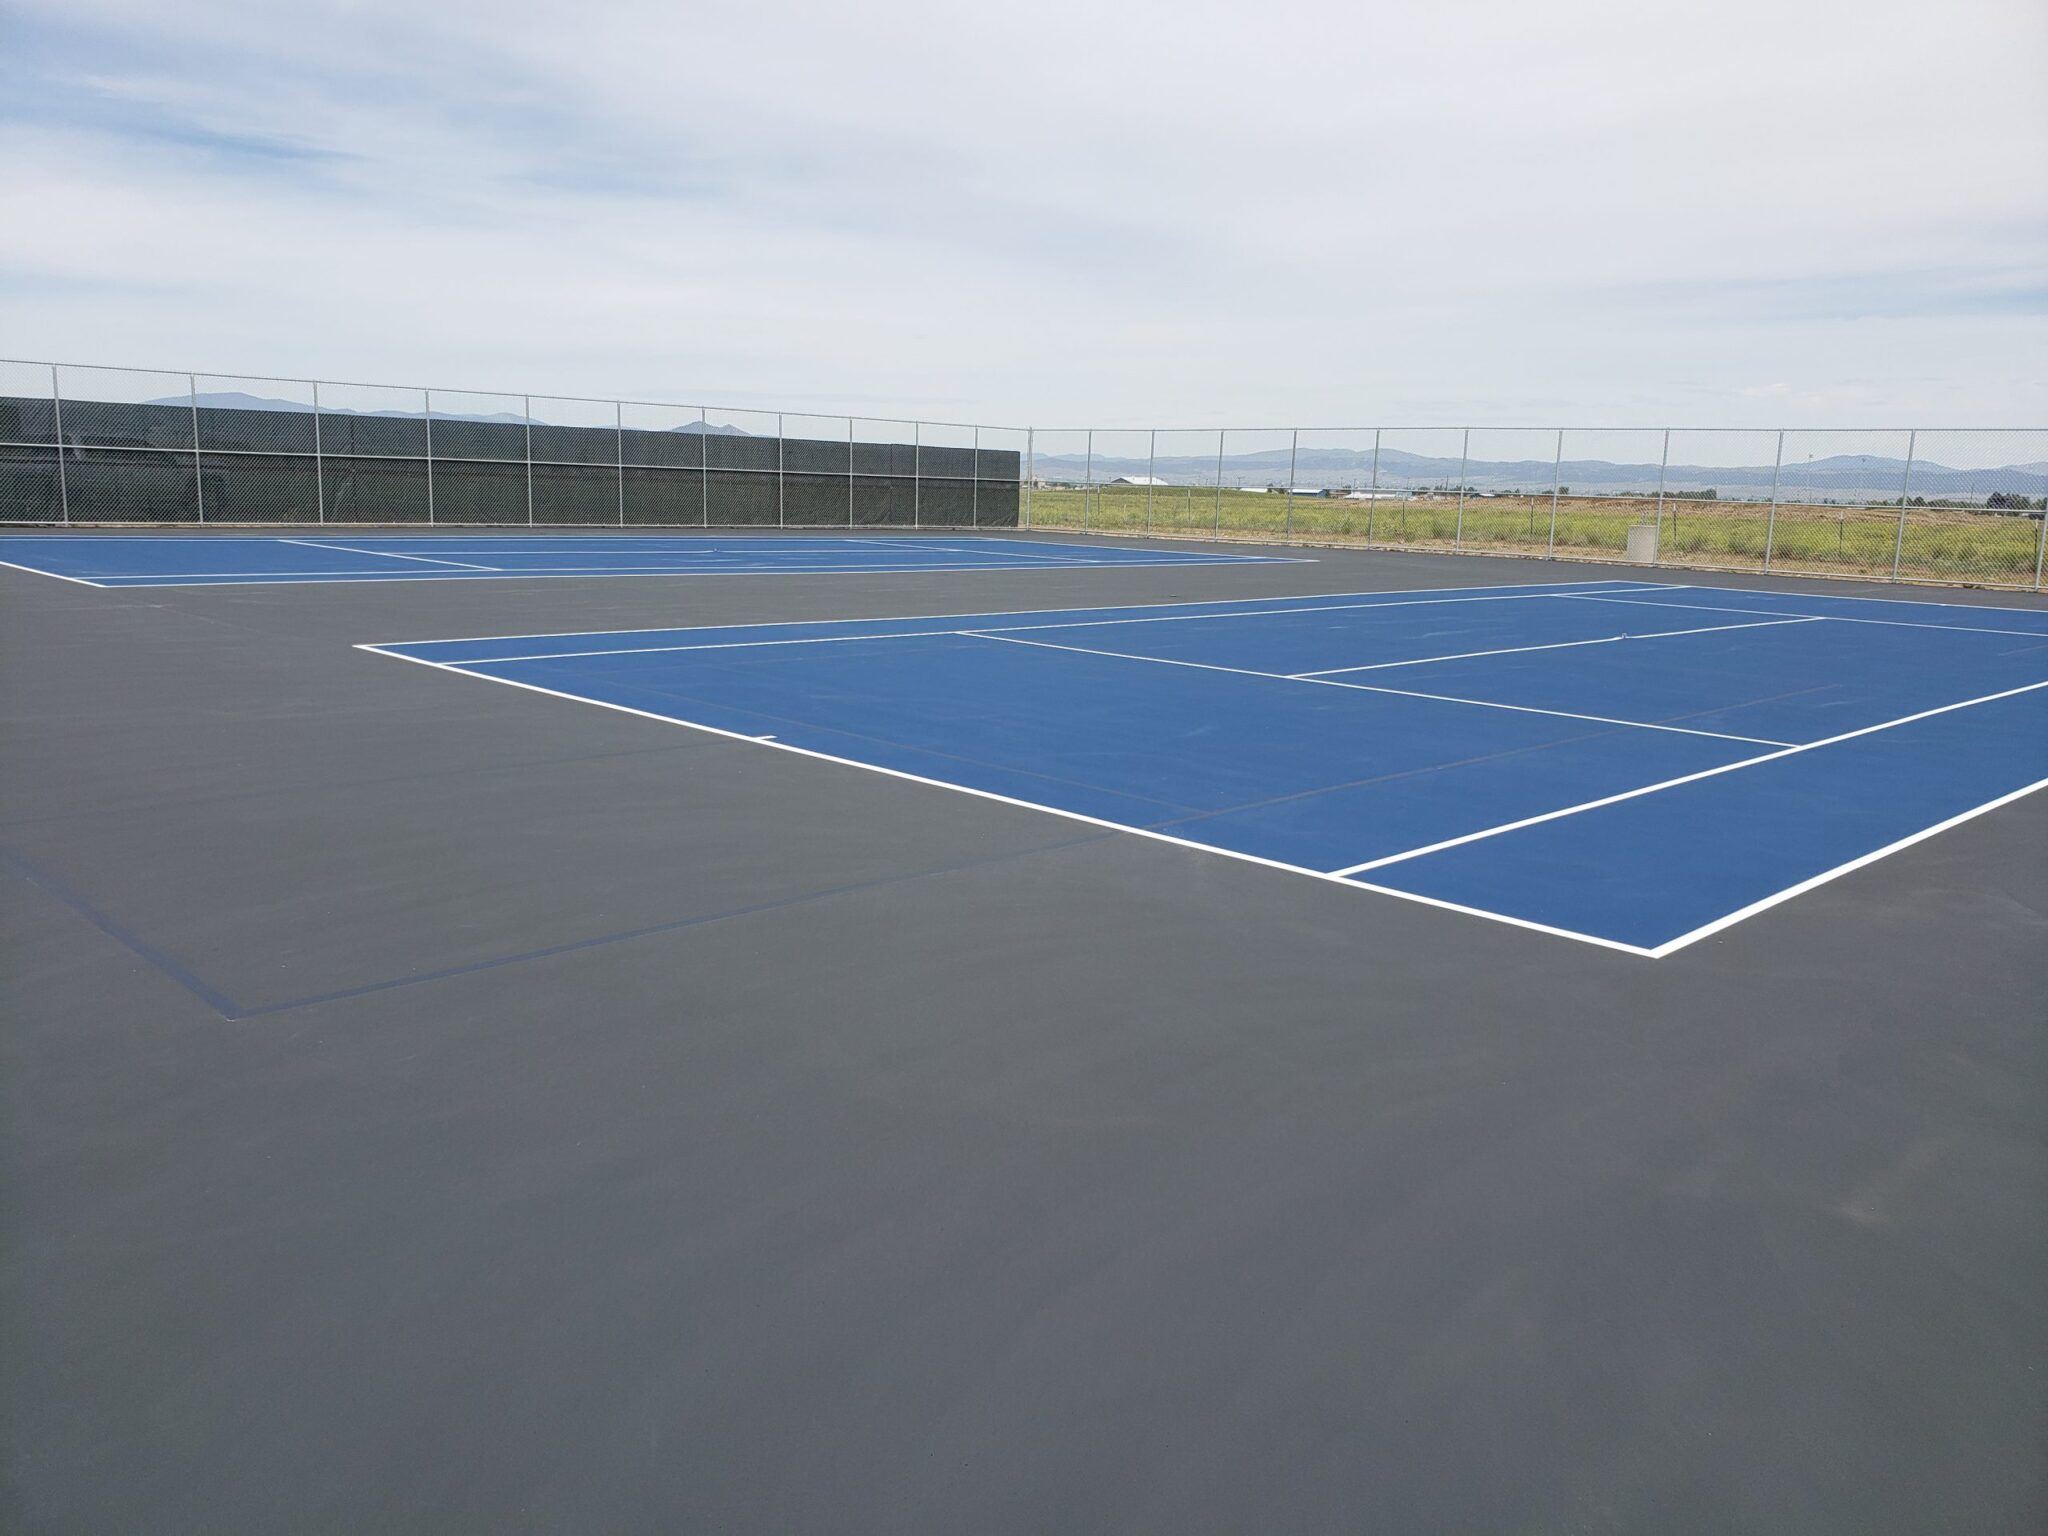 A new tennis court complex with fencing that includes grey, blue, and white colors.